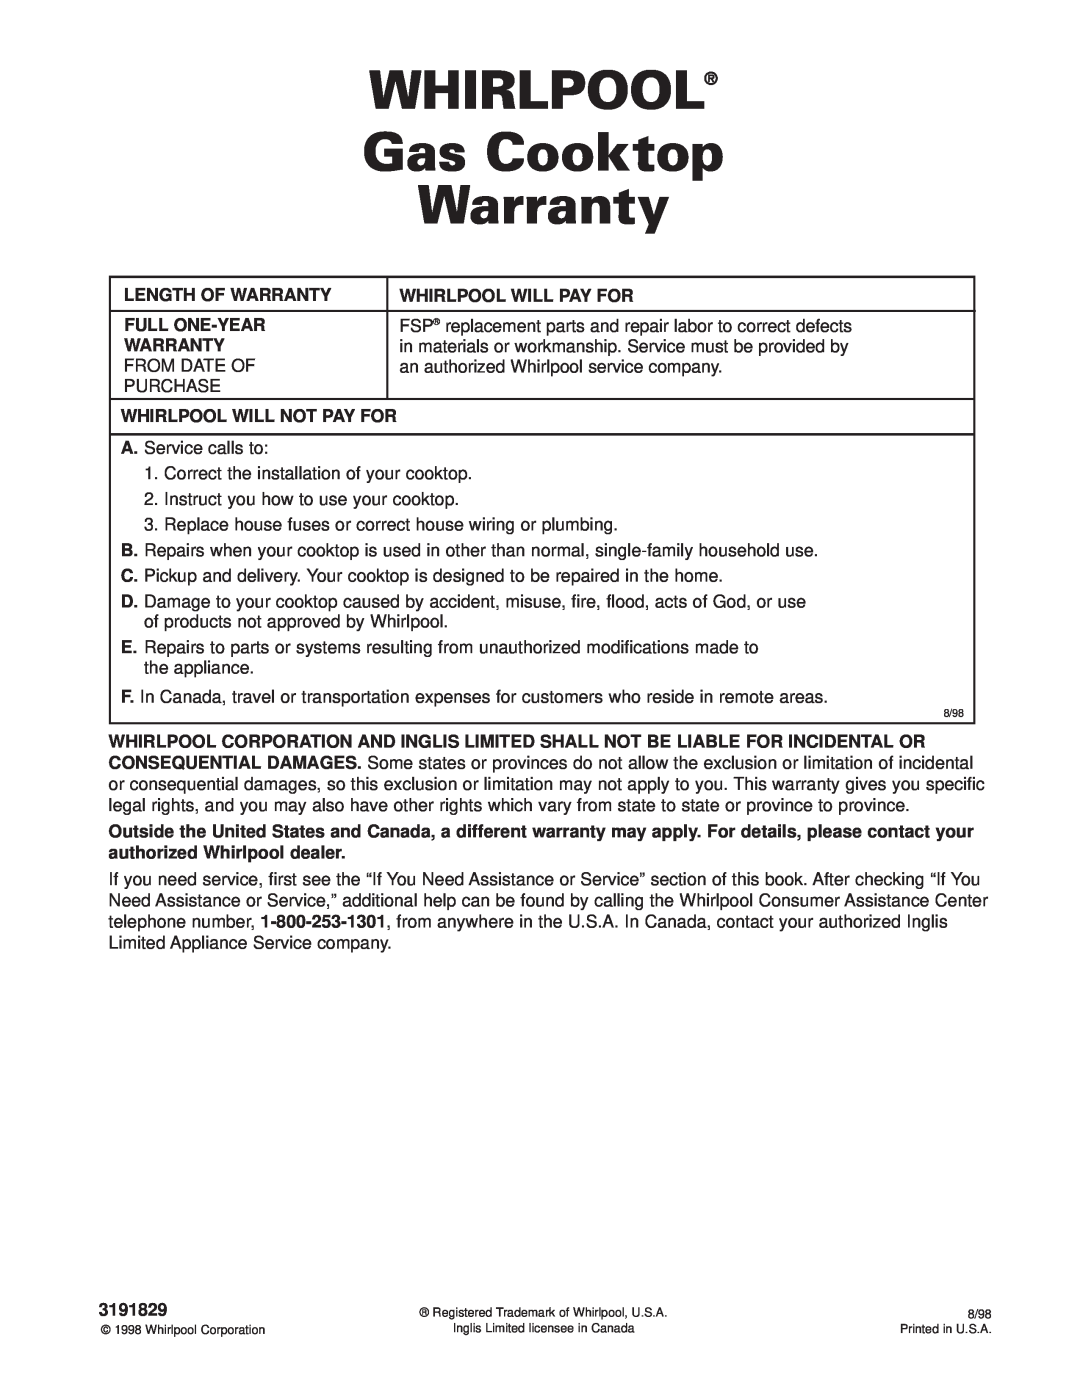 Whirlpool SCS3014G, SCS3614G, SCS3004G, GLT3014G, GLT3614G important safety instructions Whirlpool, Gas Cooktop, Warranty 